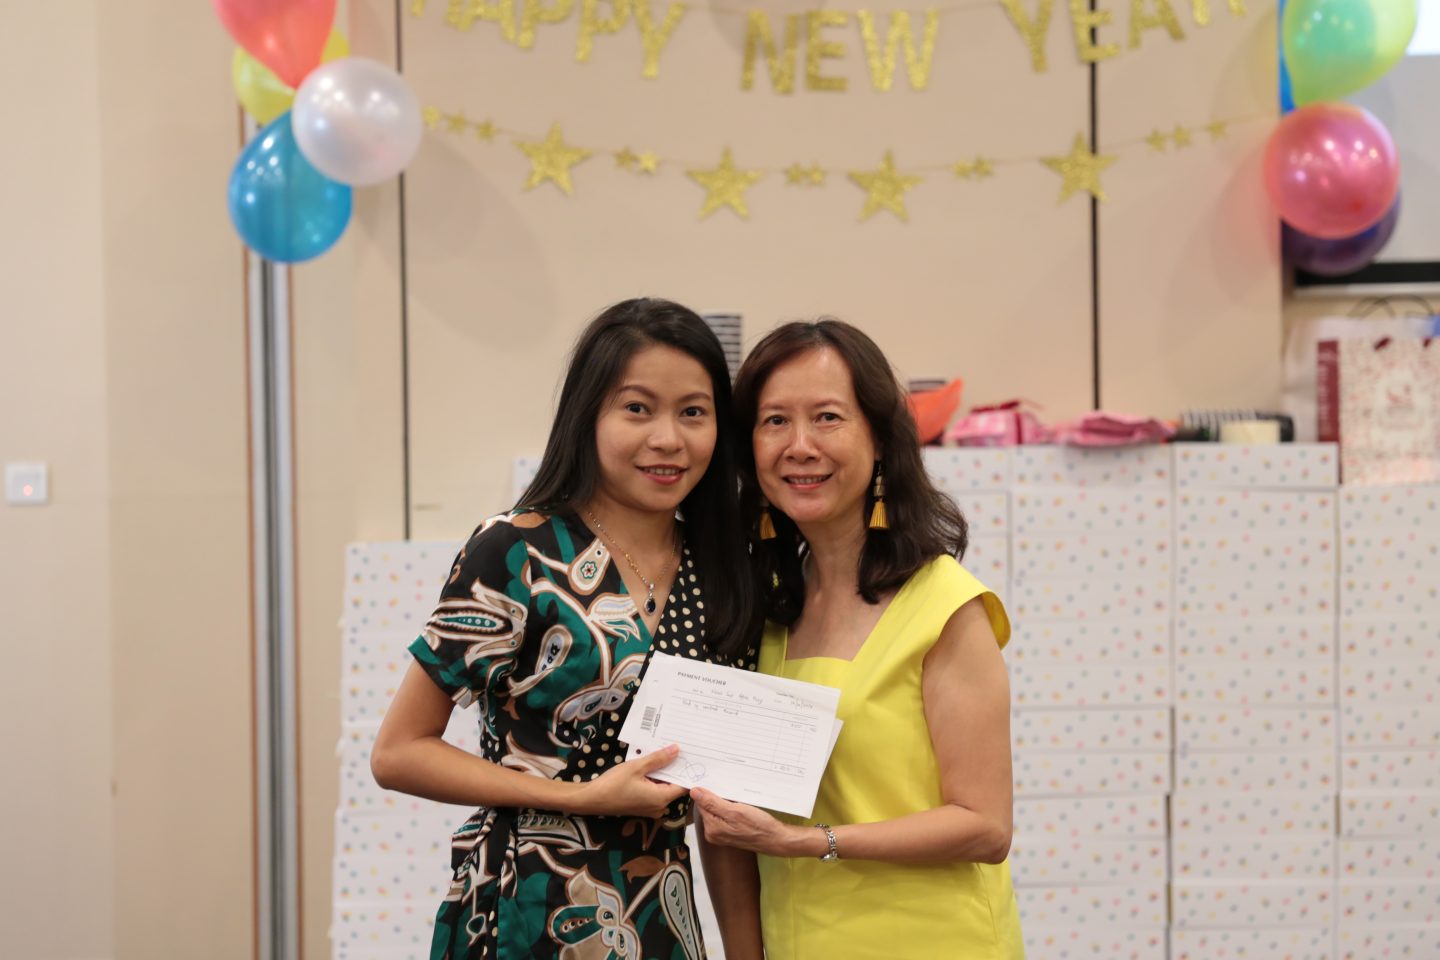 Naw Sar Htoo Ray (left) receiving her end of contract award from Wai Yee (James' wife)